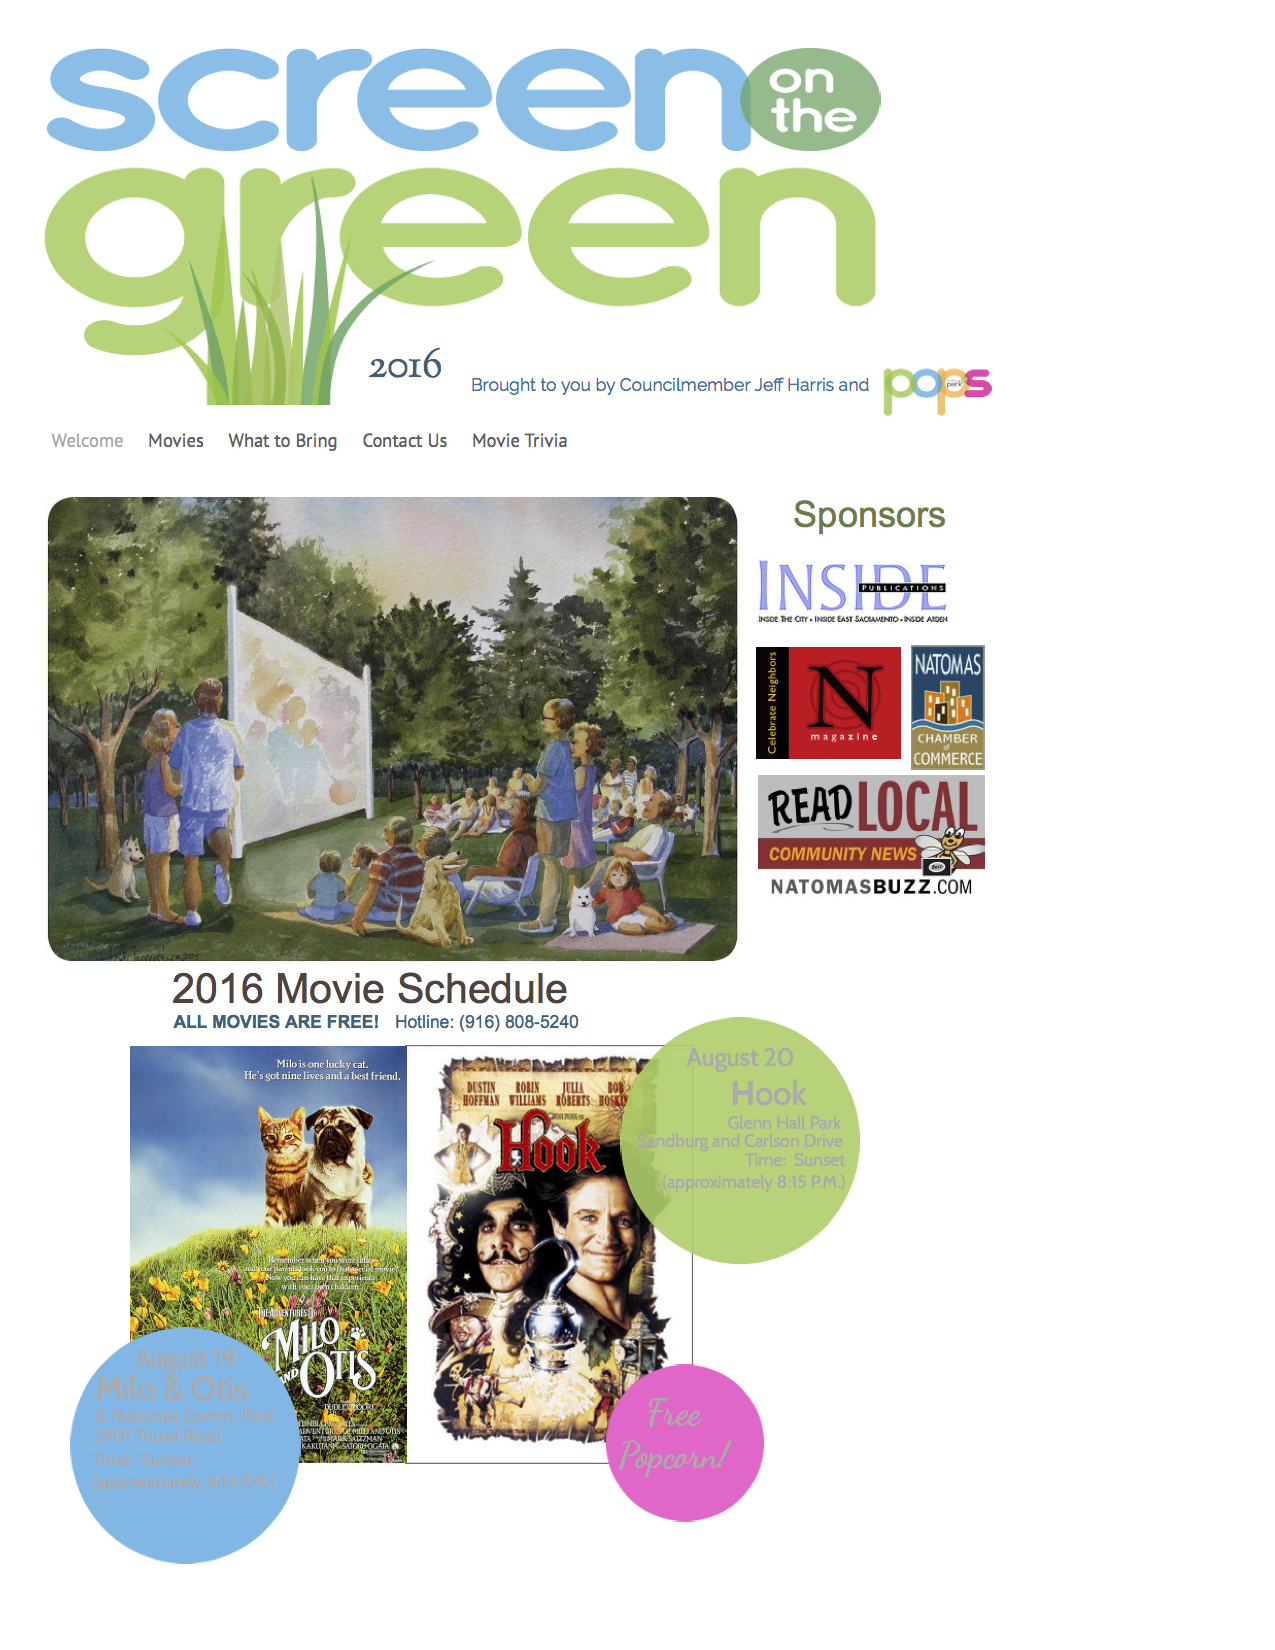 Screen on the Green 2016